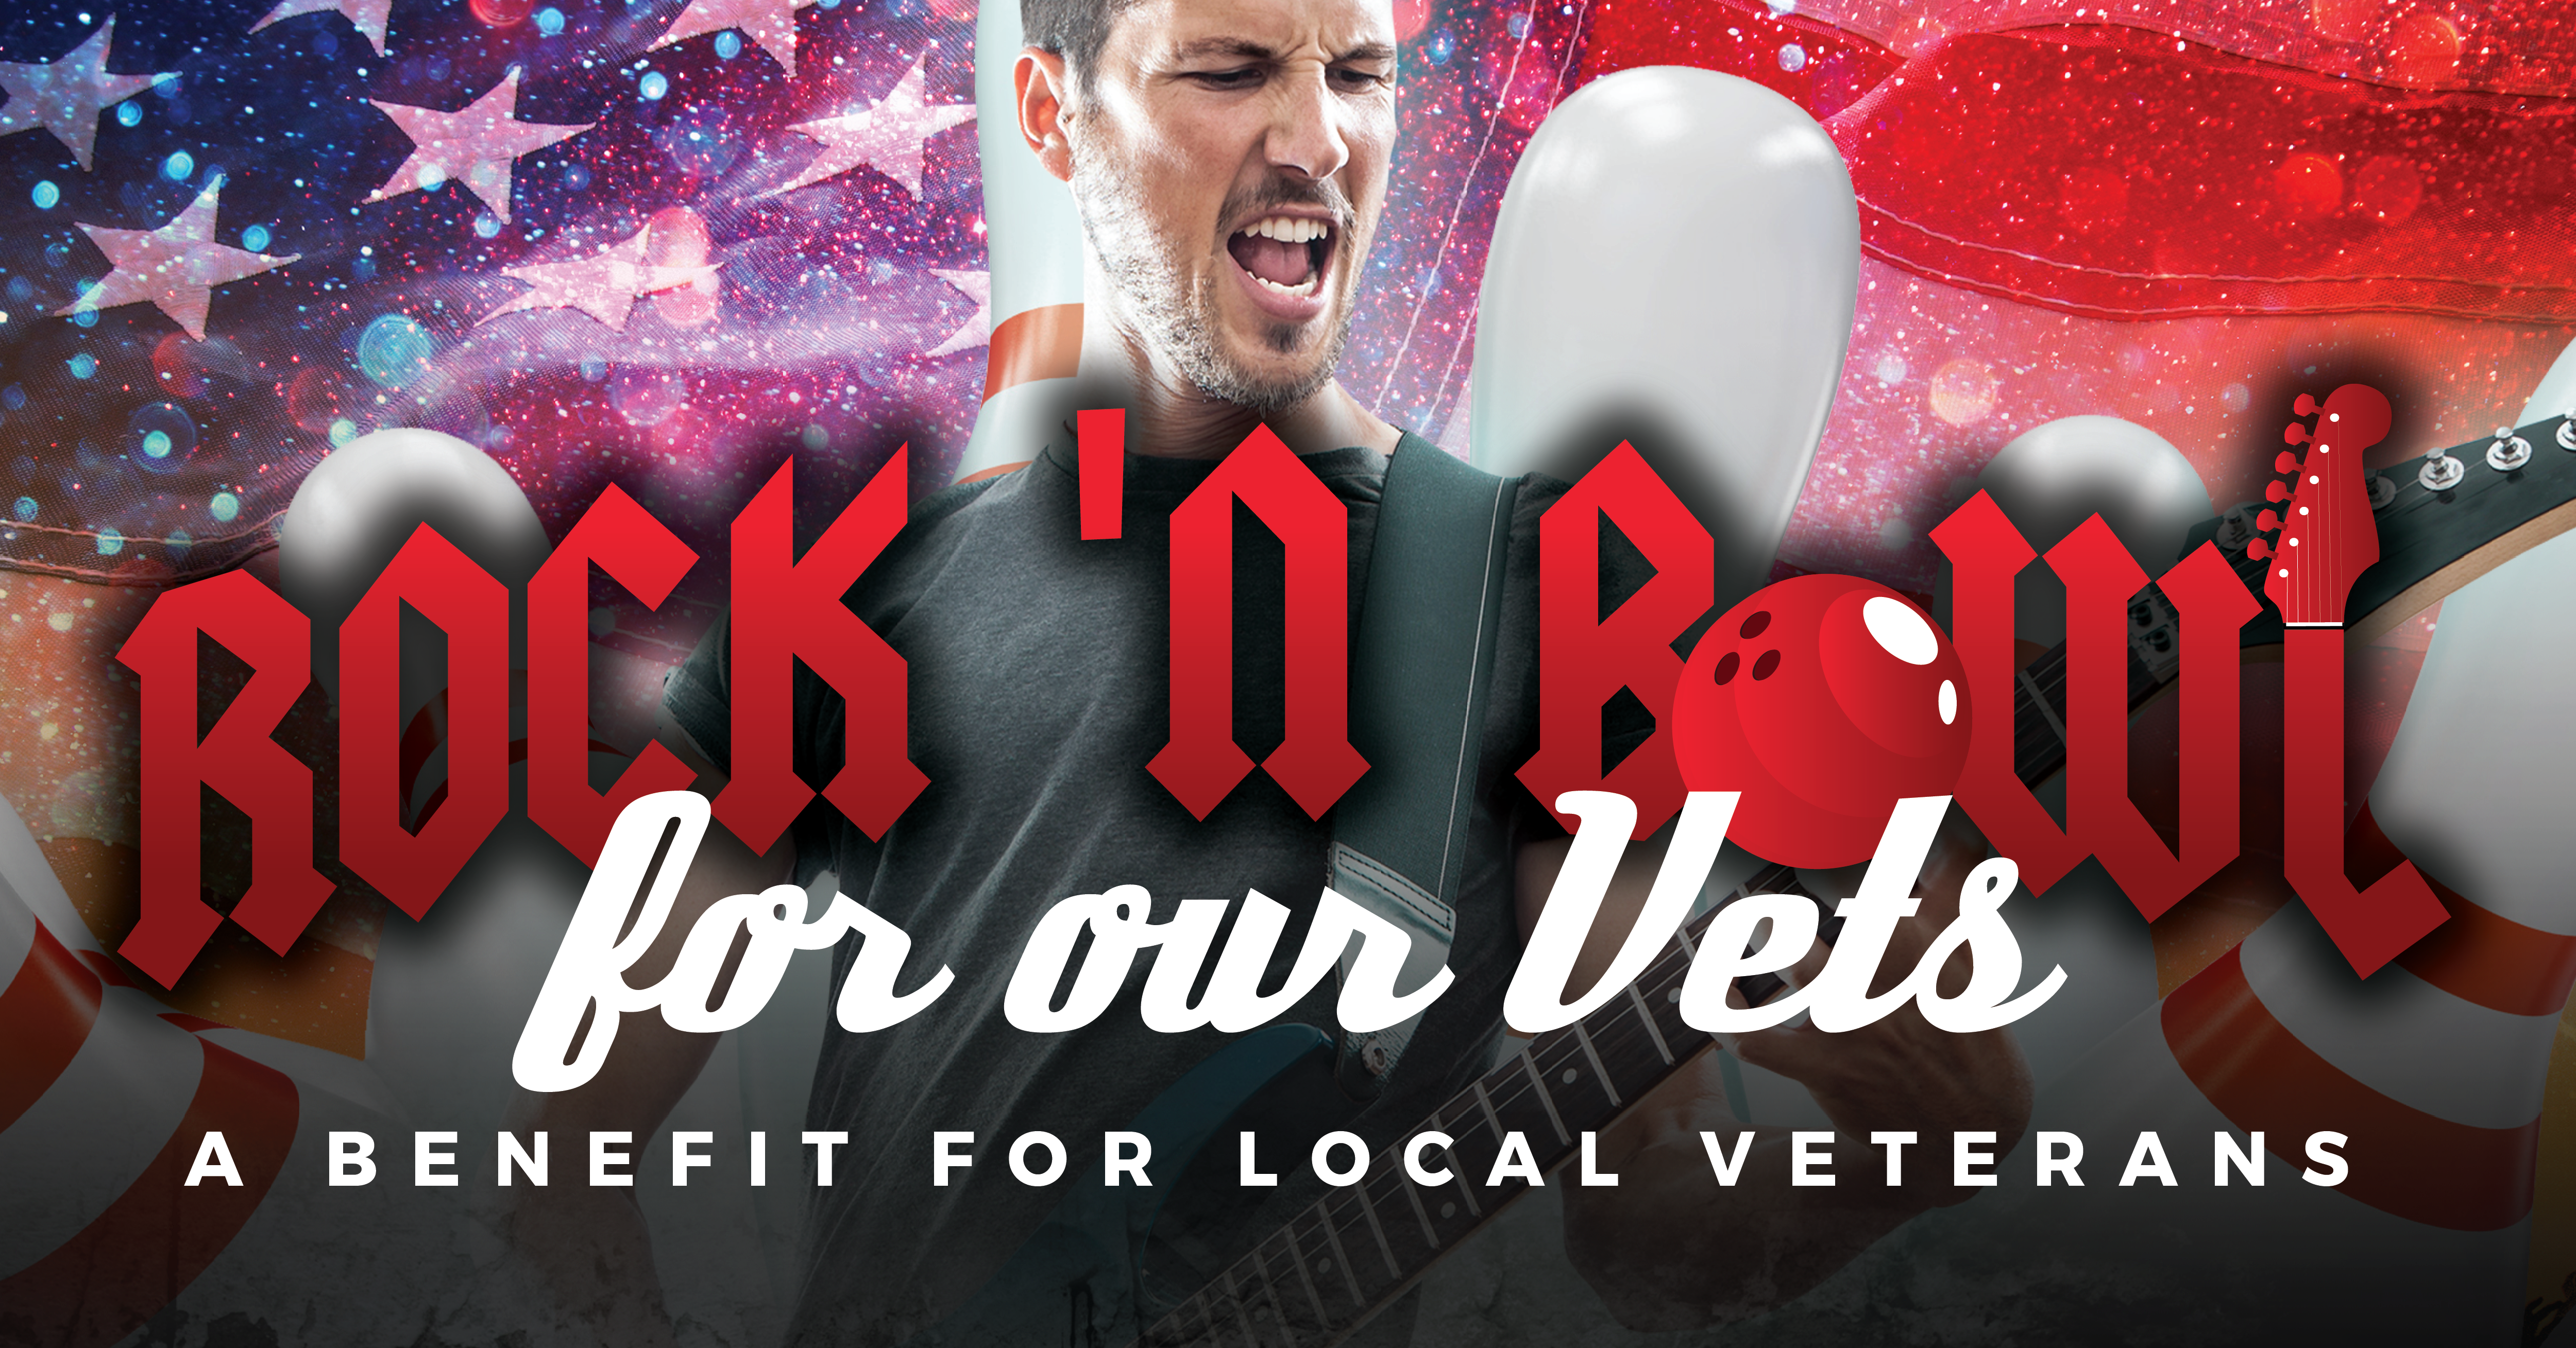 Rock 'N' Bowl For our Vets header with man playing guitar and American flag background